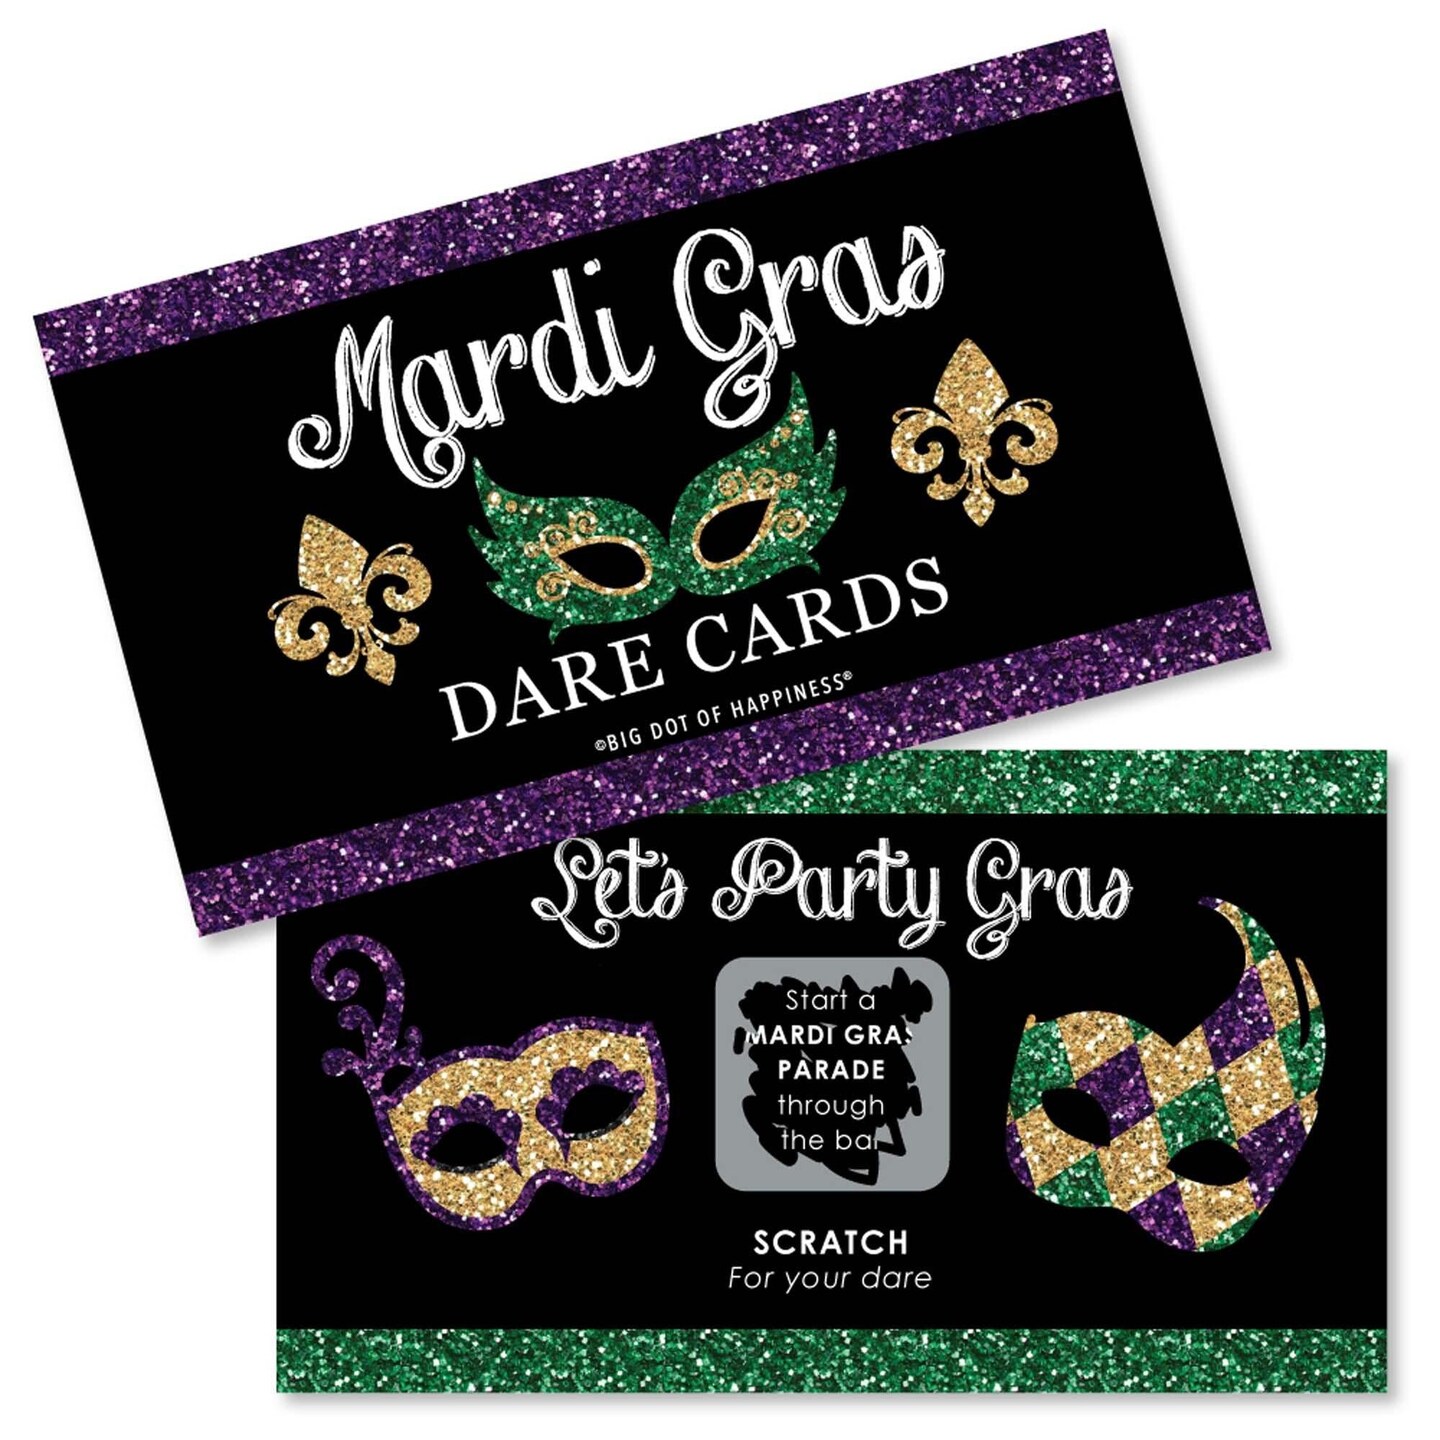 Big Dot of Happiness Mardi Gras - Masquerade Party Decorations Party Banner